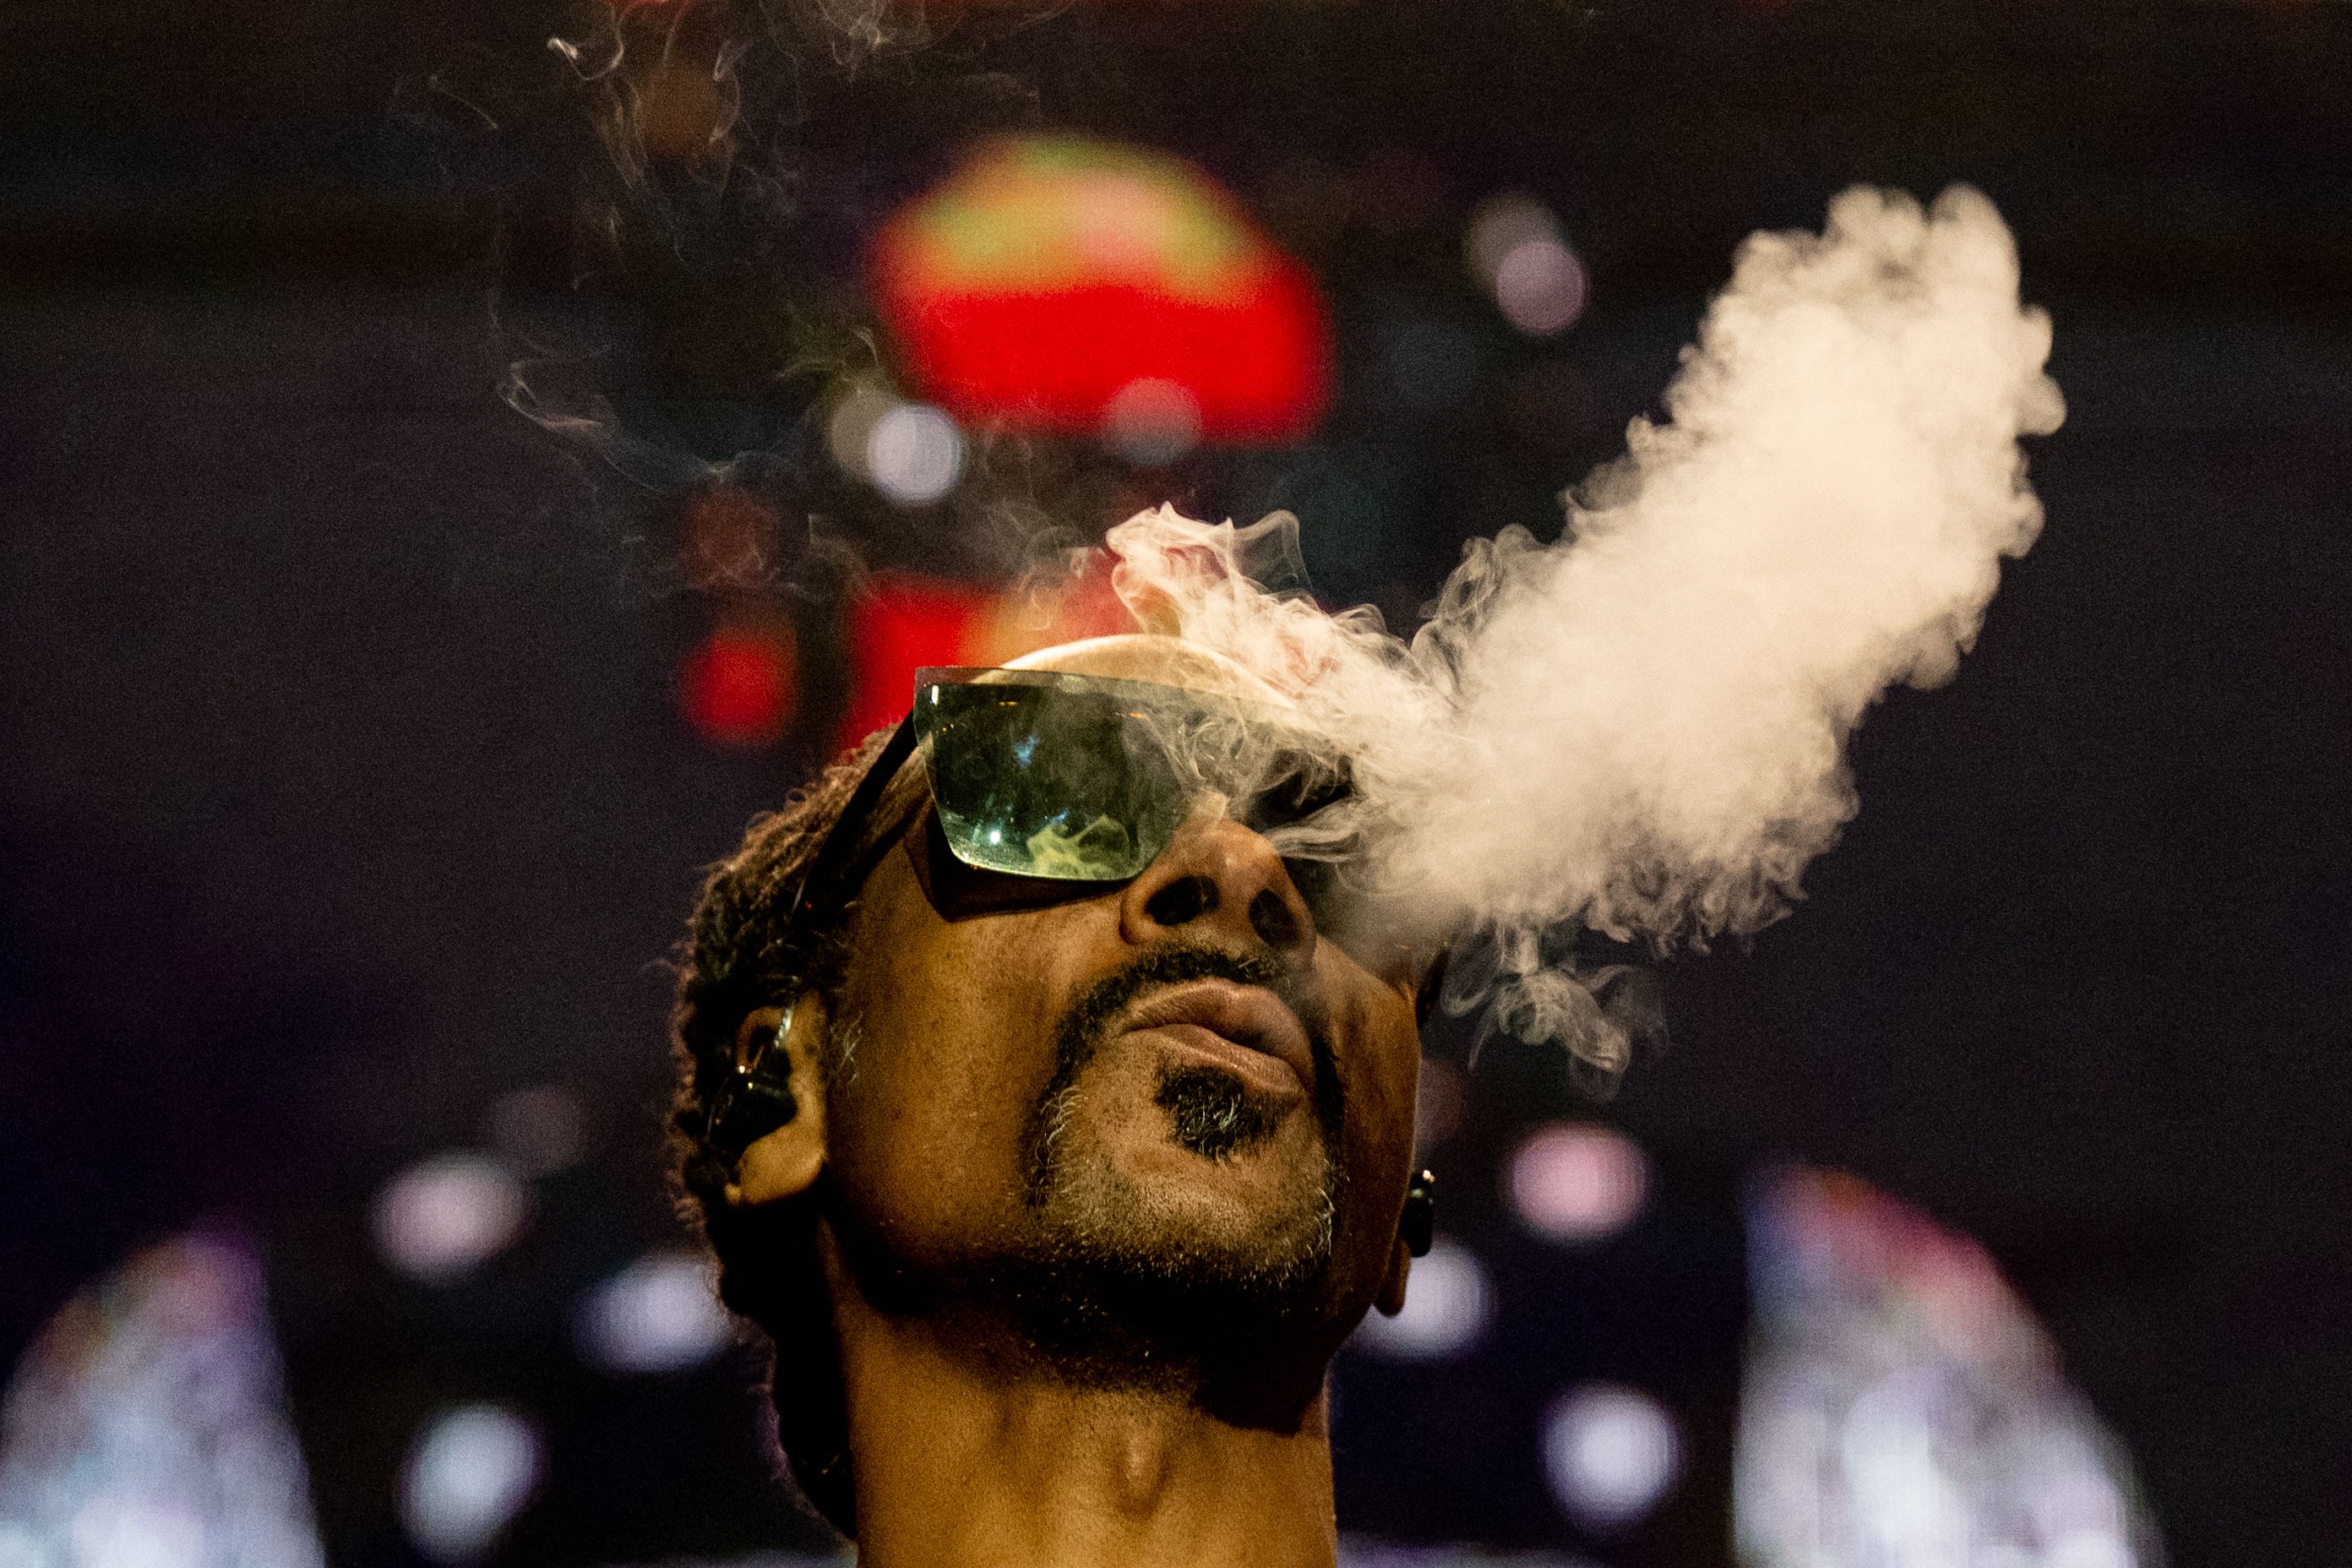 A close up of rapper Snoop Dogg blowing smoke.